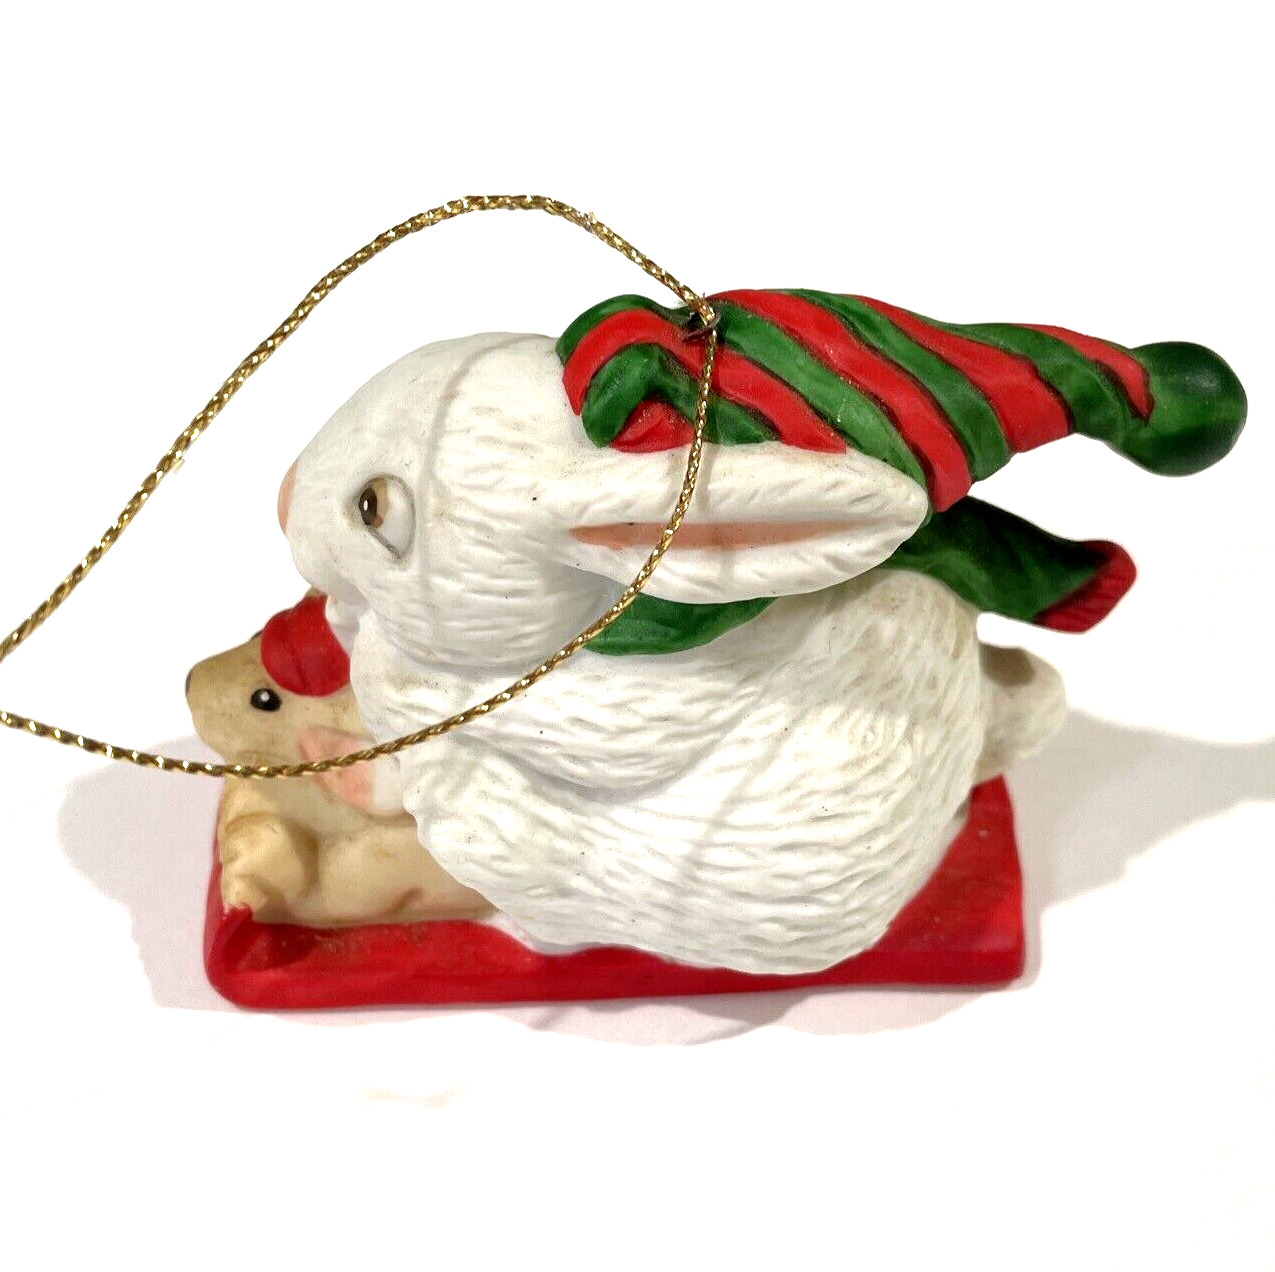 VTG 1989 Current Inc Bunny Rabbit Mouse Sled Collectible Christmas Ornament Xmas